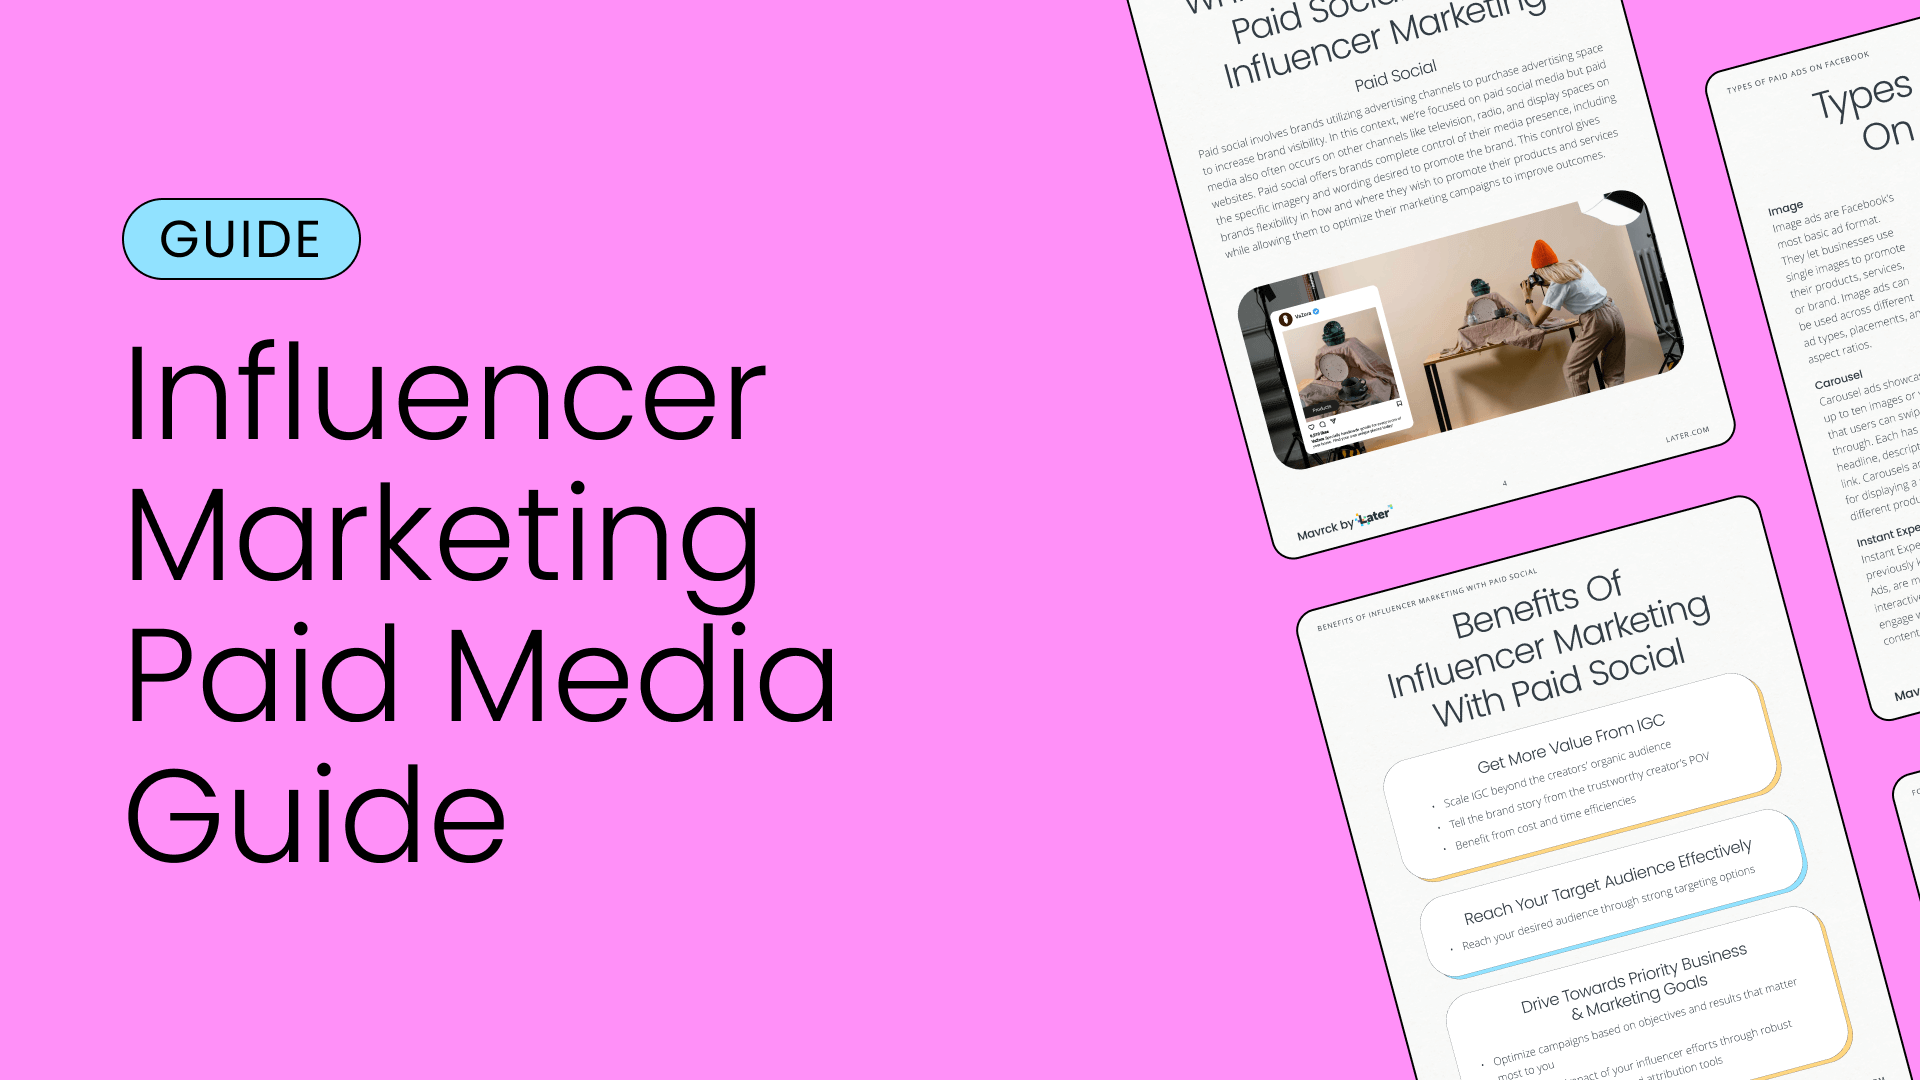 Free guide to influencer marketing and paid media from Later